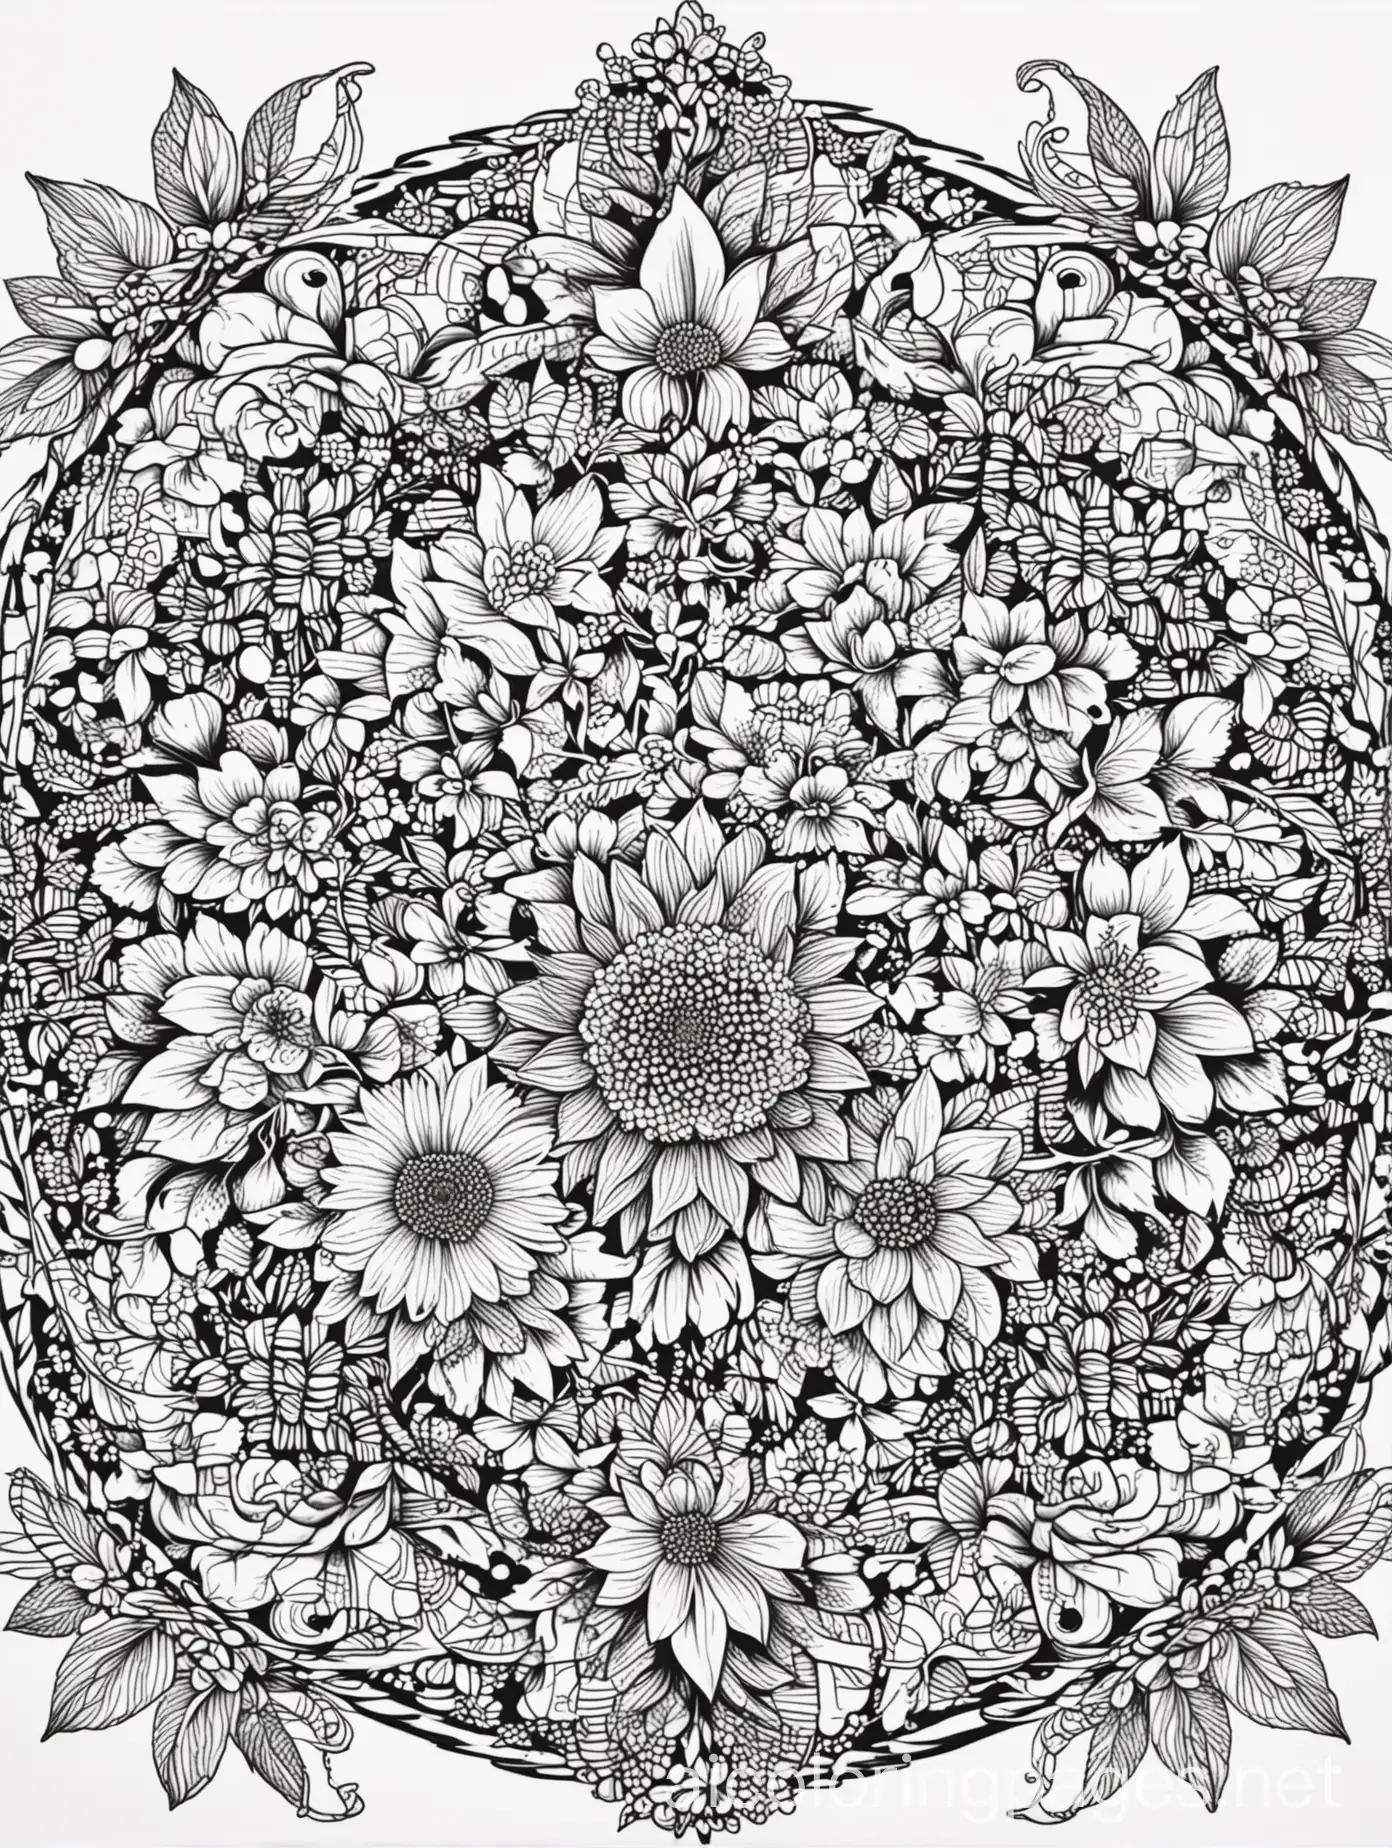 Floral-Mandala-Coloring-Page-Growth-and-Natural-Beauty-in-Black-and-White